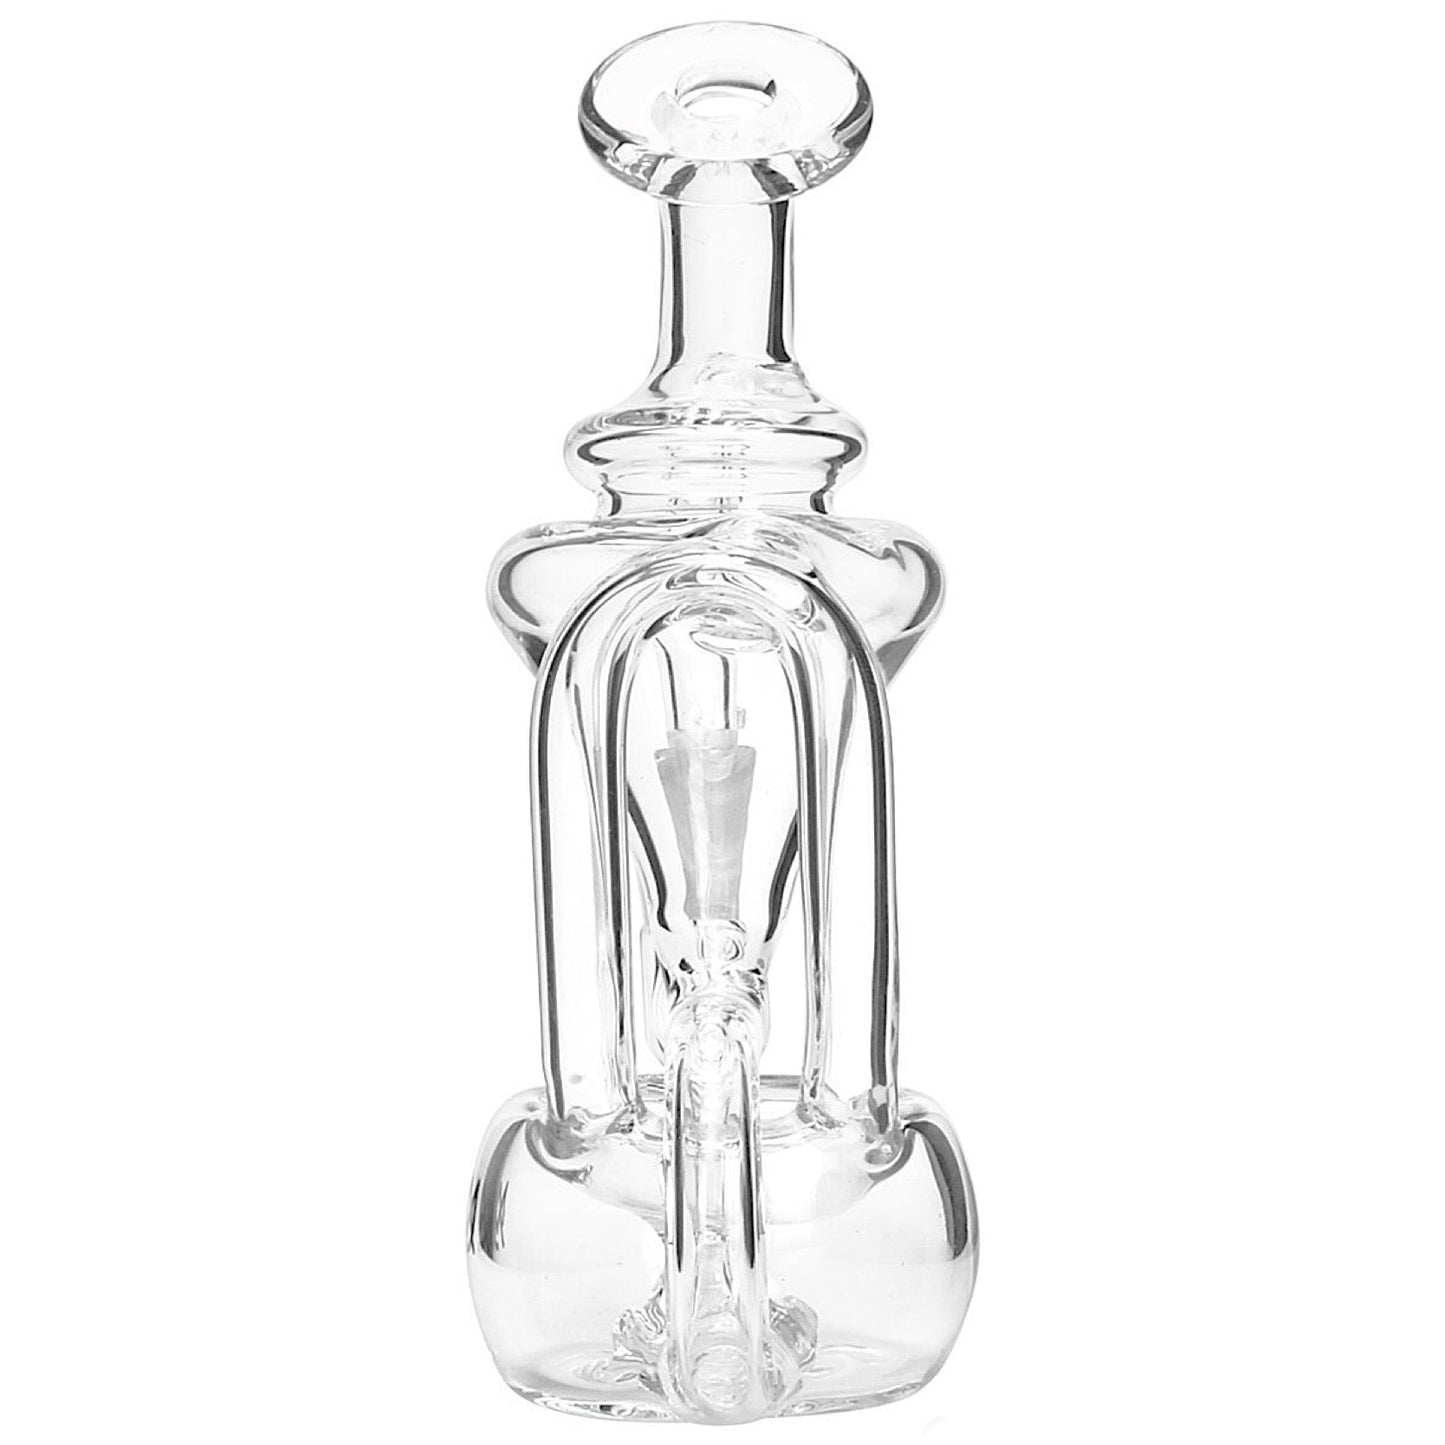 MJ Arsenal “Claude” Mini Recycler Rig by MJ Arsenal | Mission Dispensary